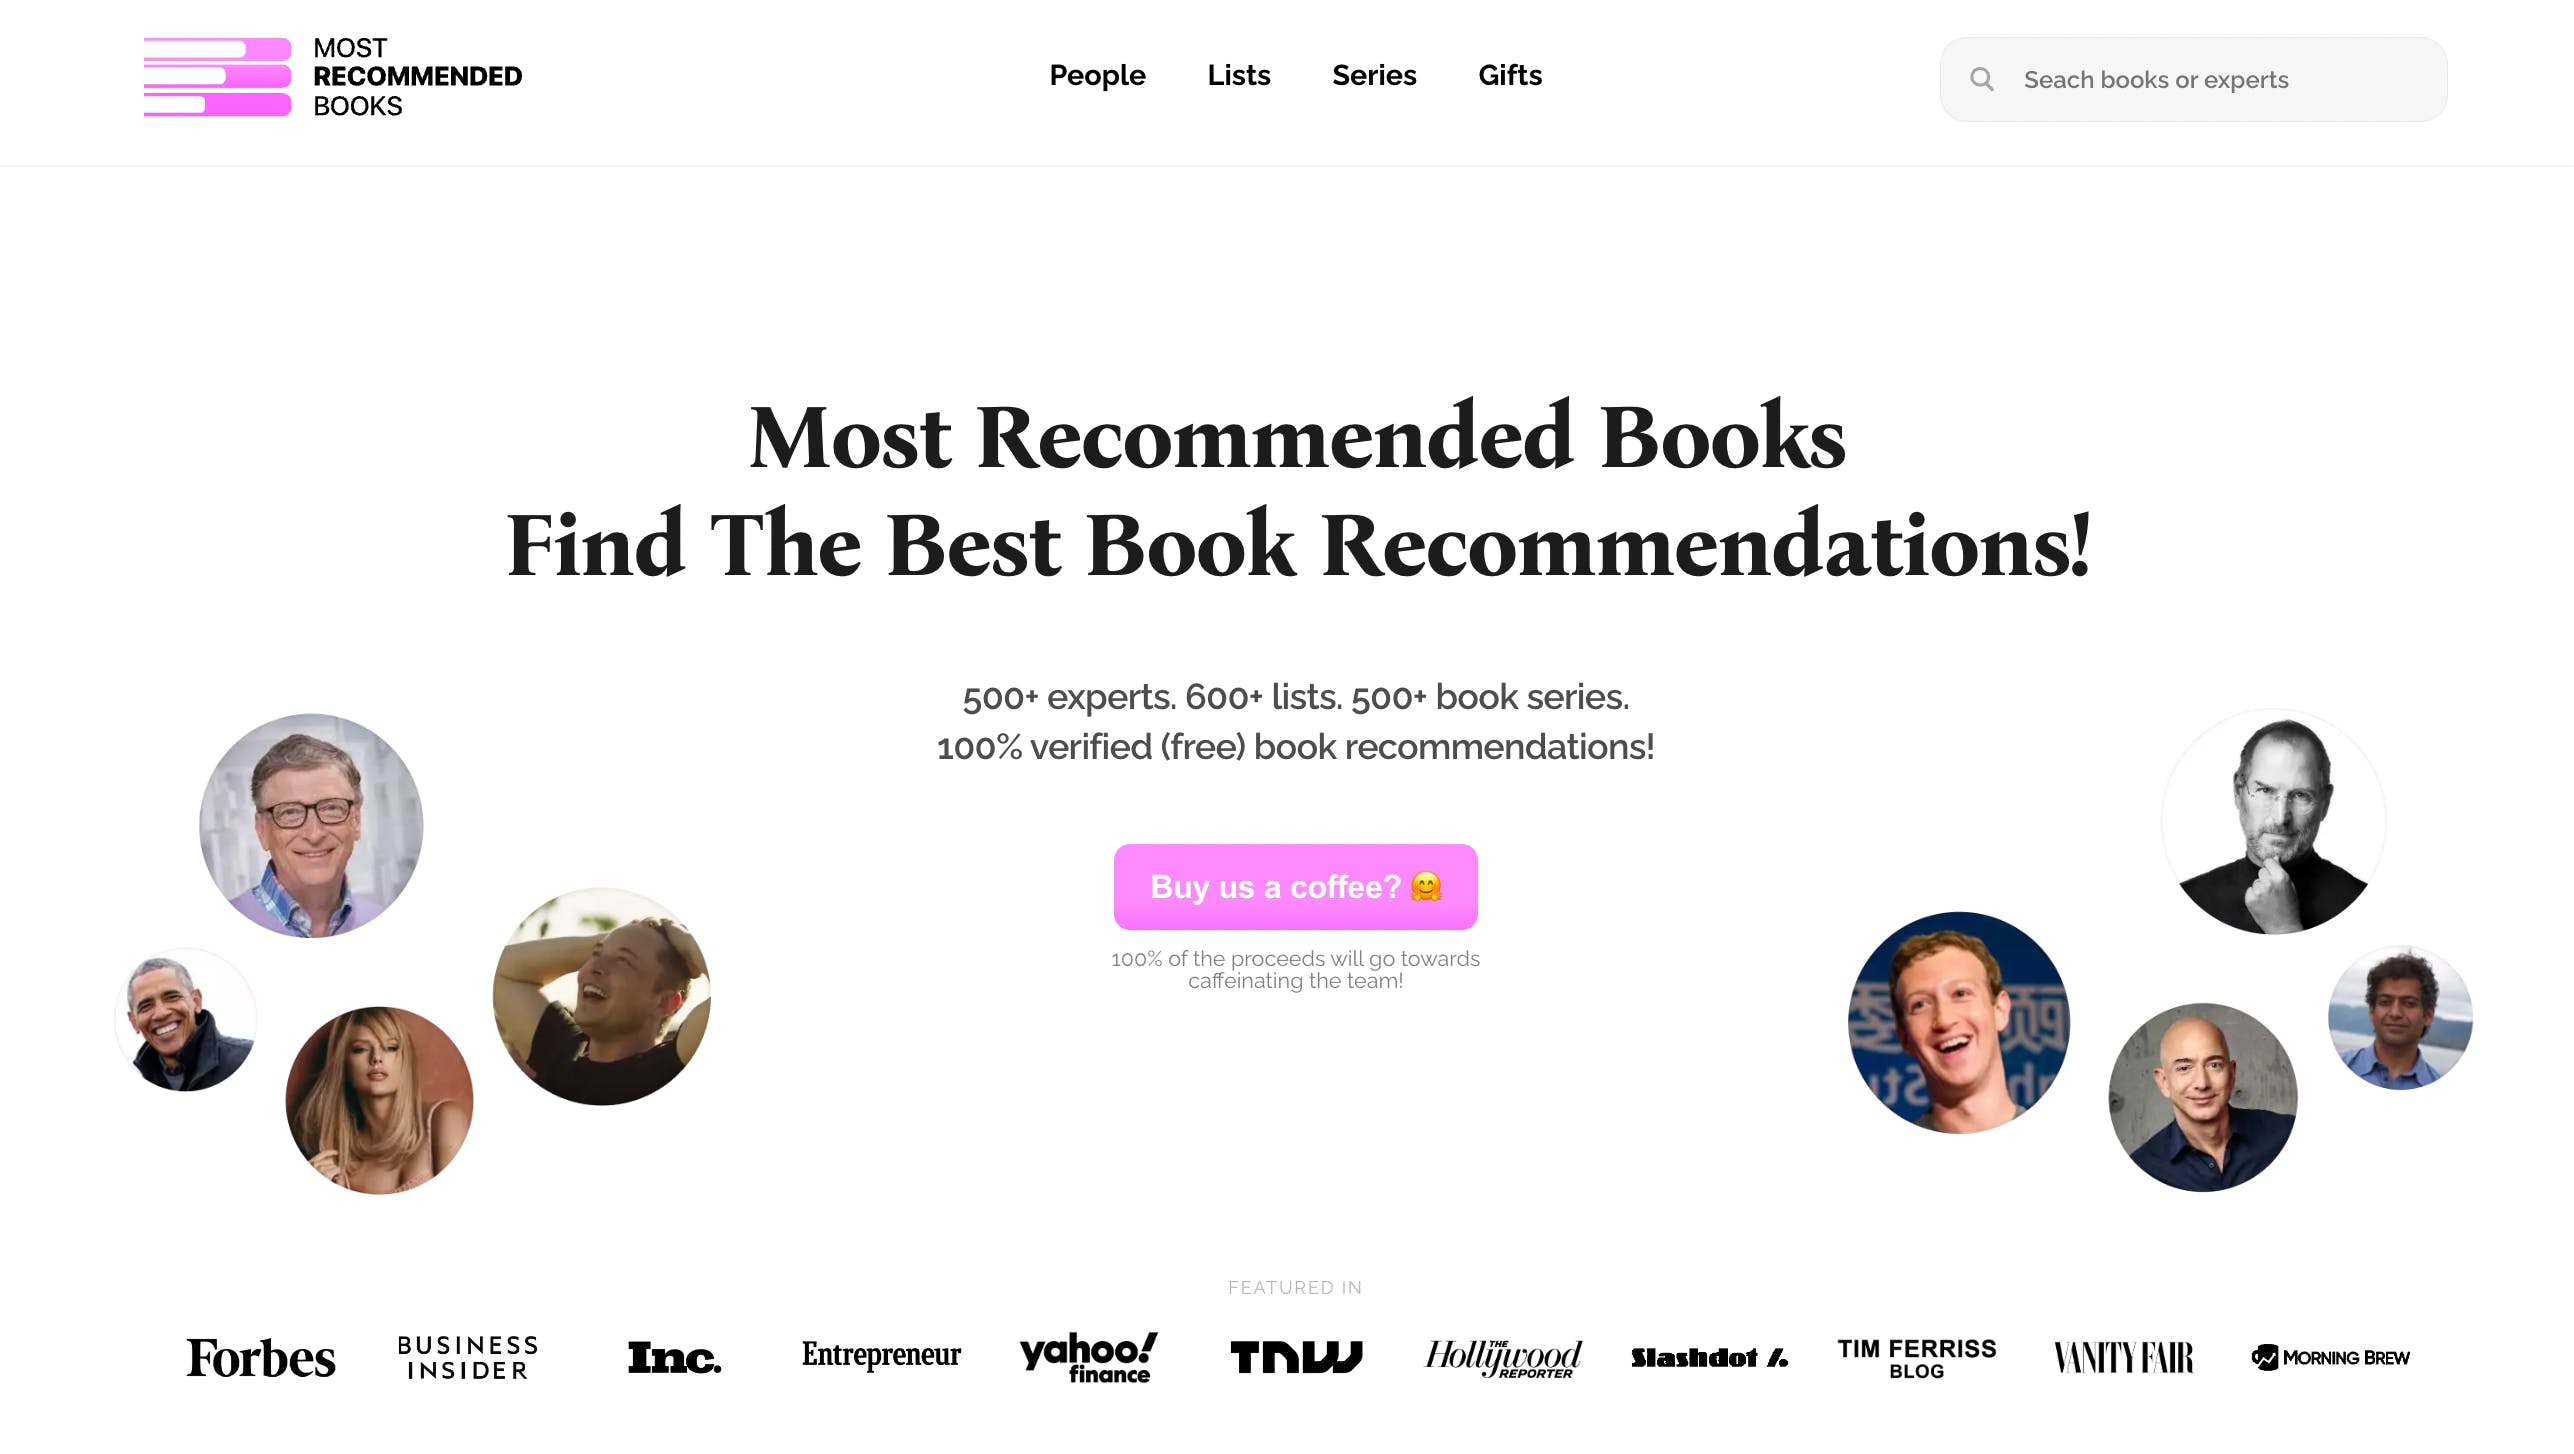 Most Recommended Books media 1